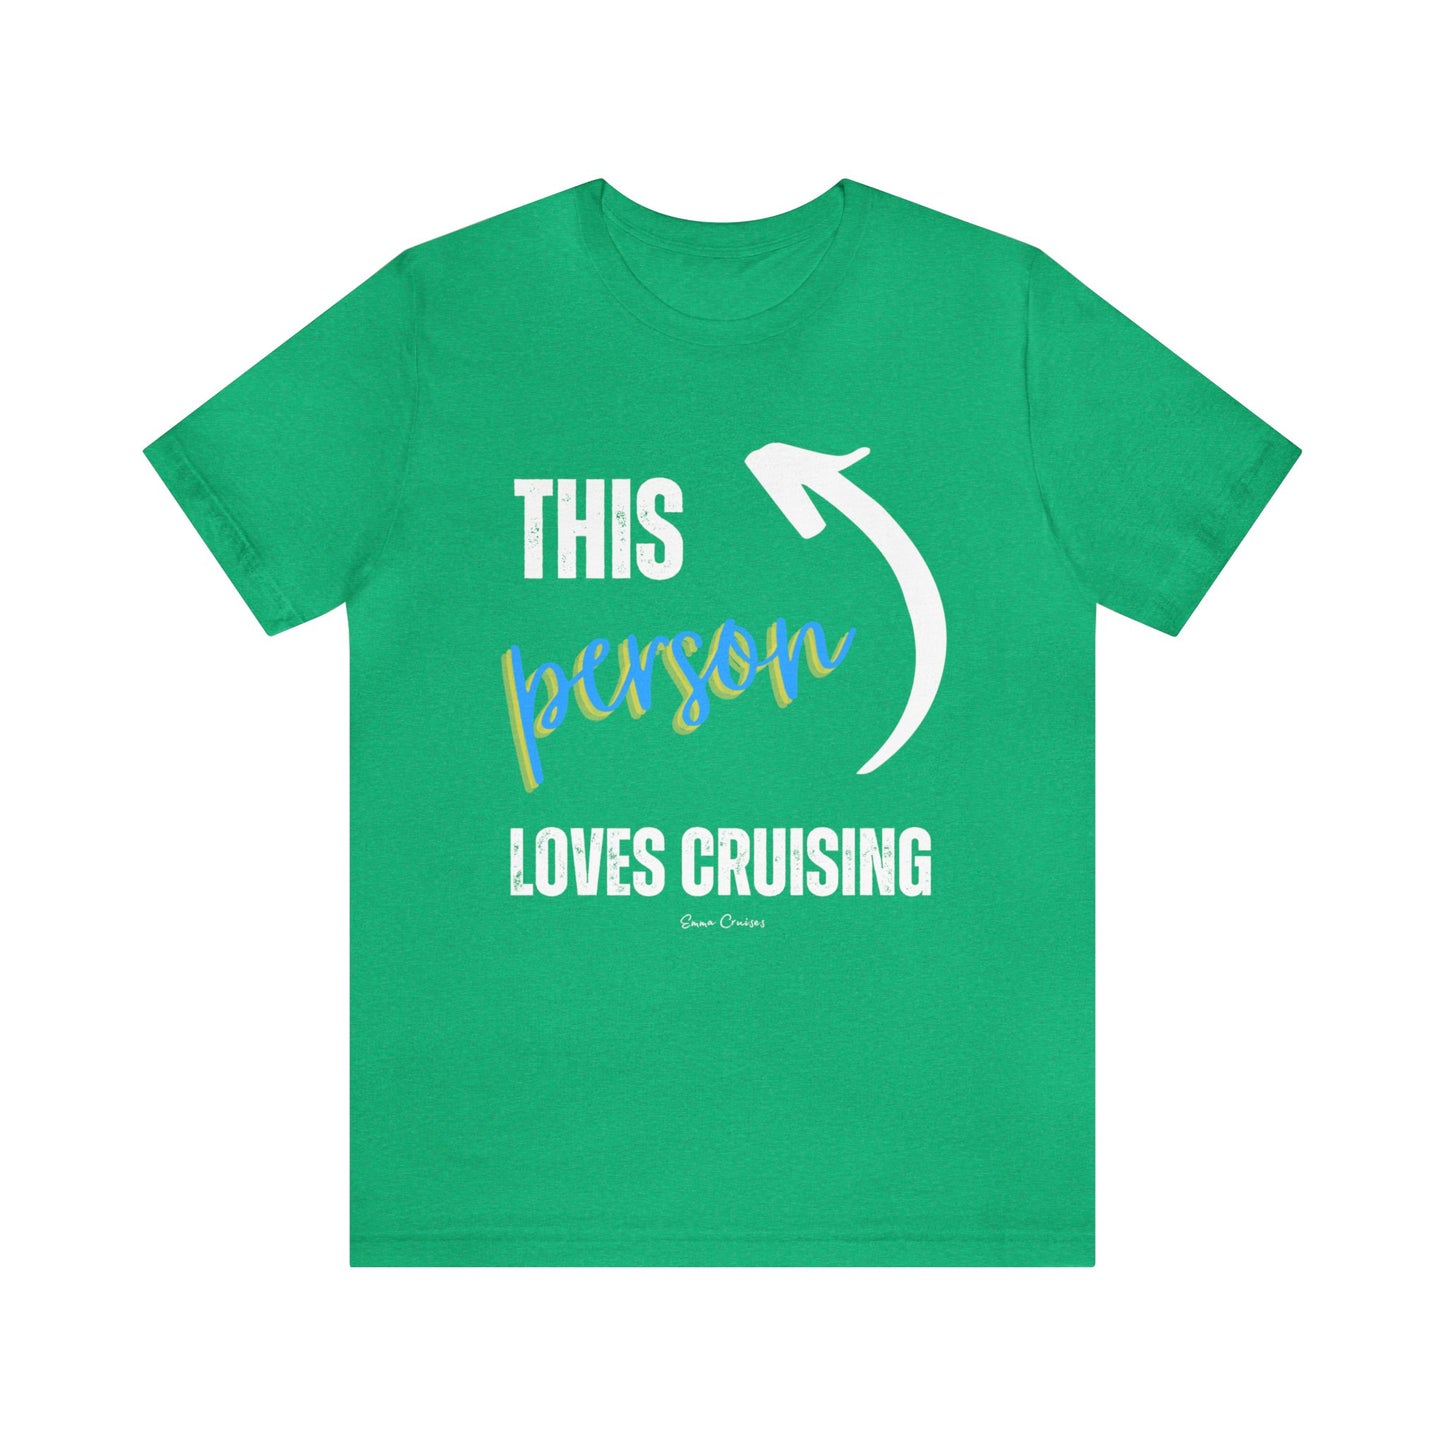 This Person Loves Cruising - UNISEX T-Shirt